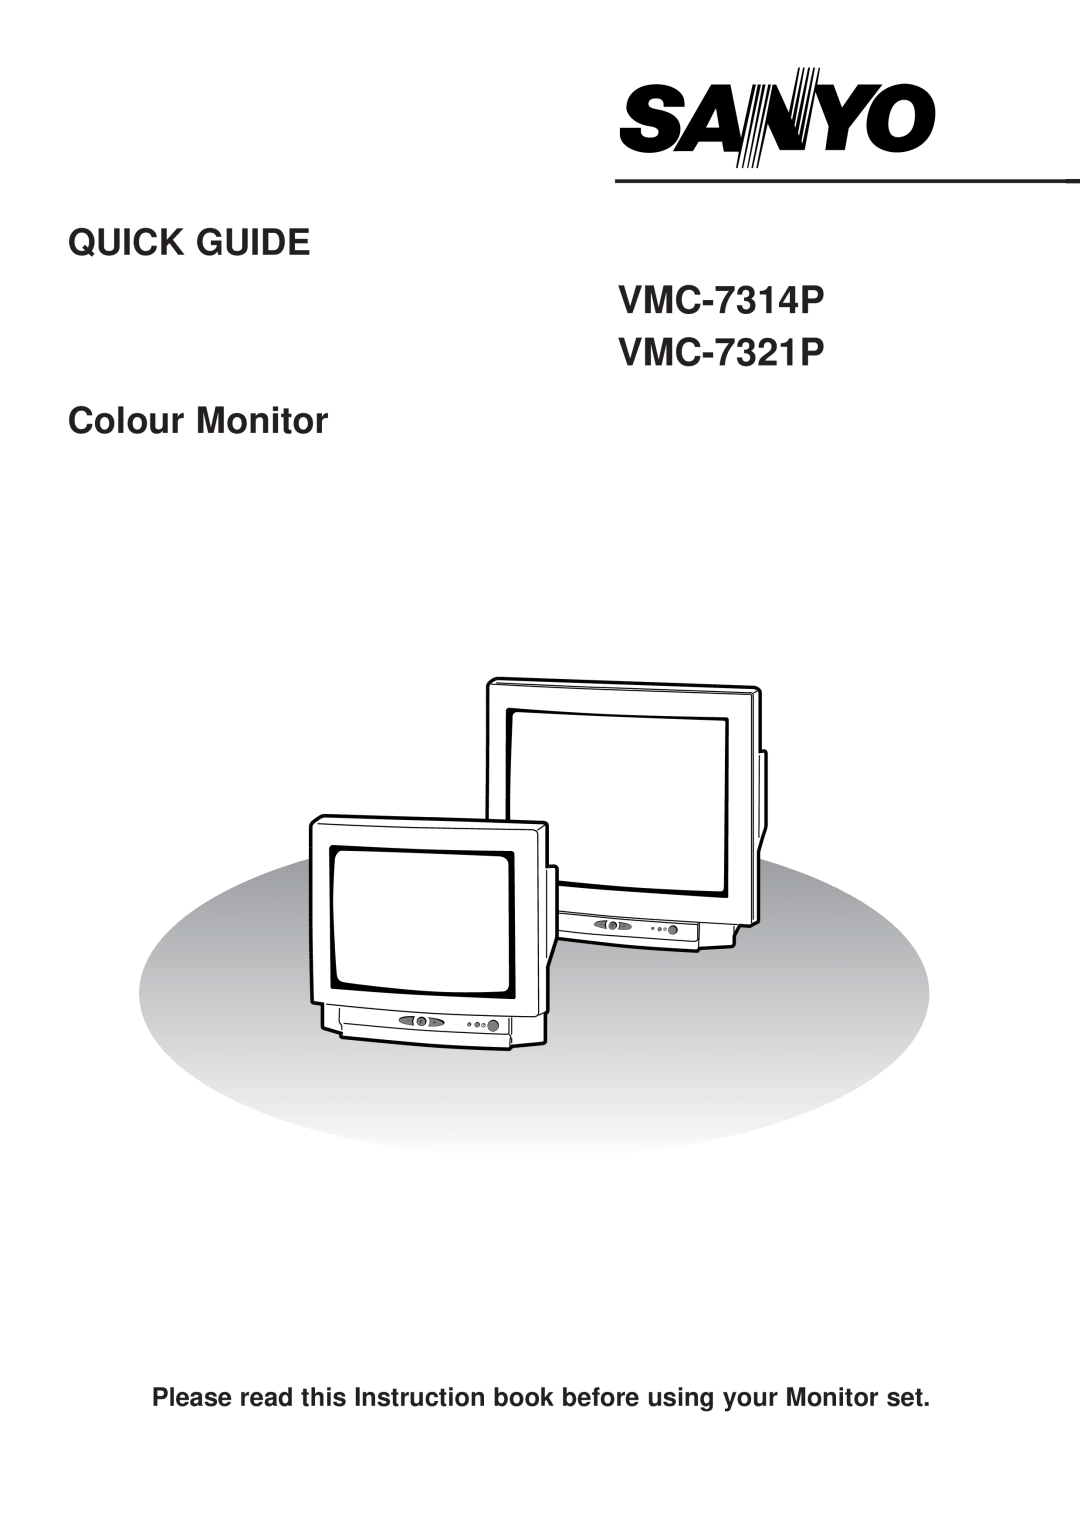 Sanyo manual Please read this Instruction book before using your Monitor set, VMC-7314P VMC-7321P, Quick Guide 